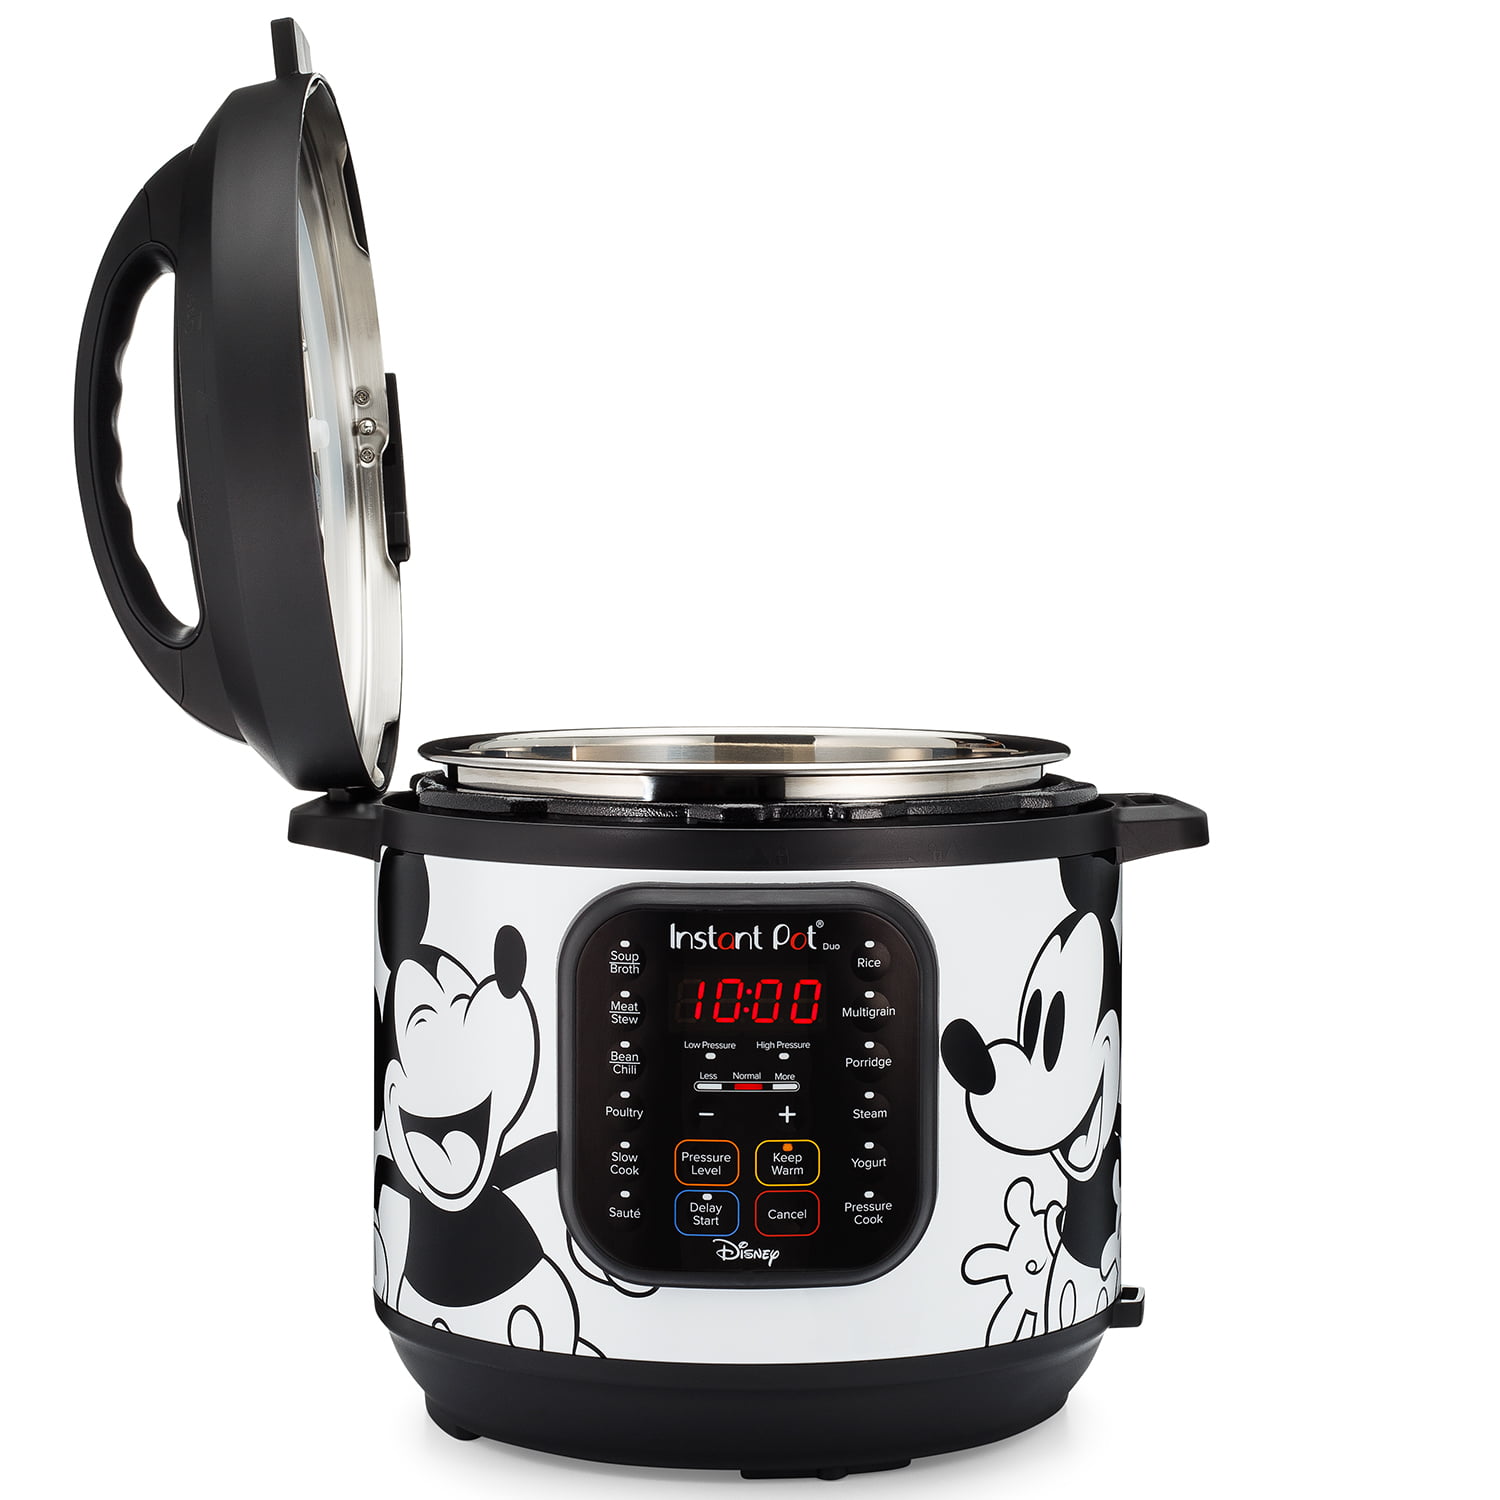 https://themarketdepot.com/wp-content/uploads/2023/01/Instant-Pot-6-Quart-Duo-Electric-Pressure-Cooker-7-in-1-Yogurt-Maker-Food-Steamer-Slow-Cooker-Rice-Cooker-More-Disney-Mickey-Mouse-White.jpeg